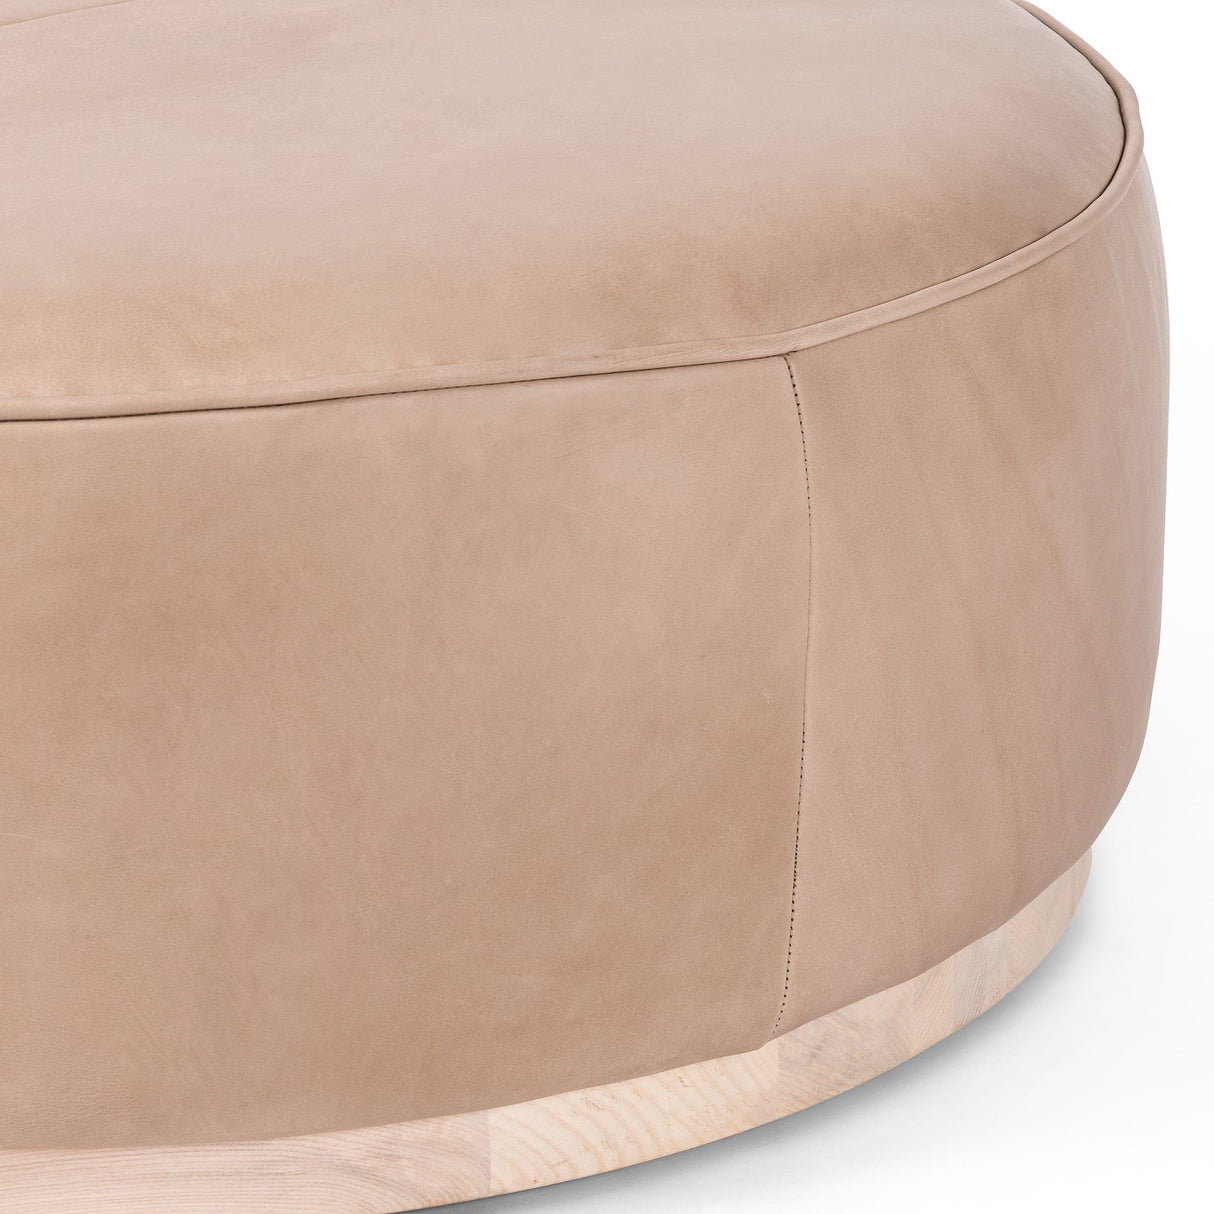 Four Hands Sinclair Large Round Ottoman Furniture